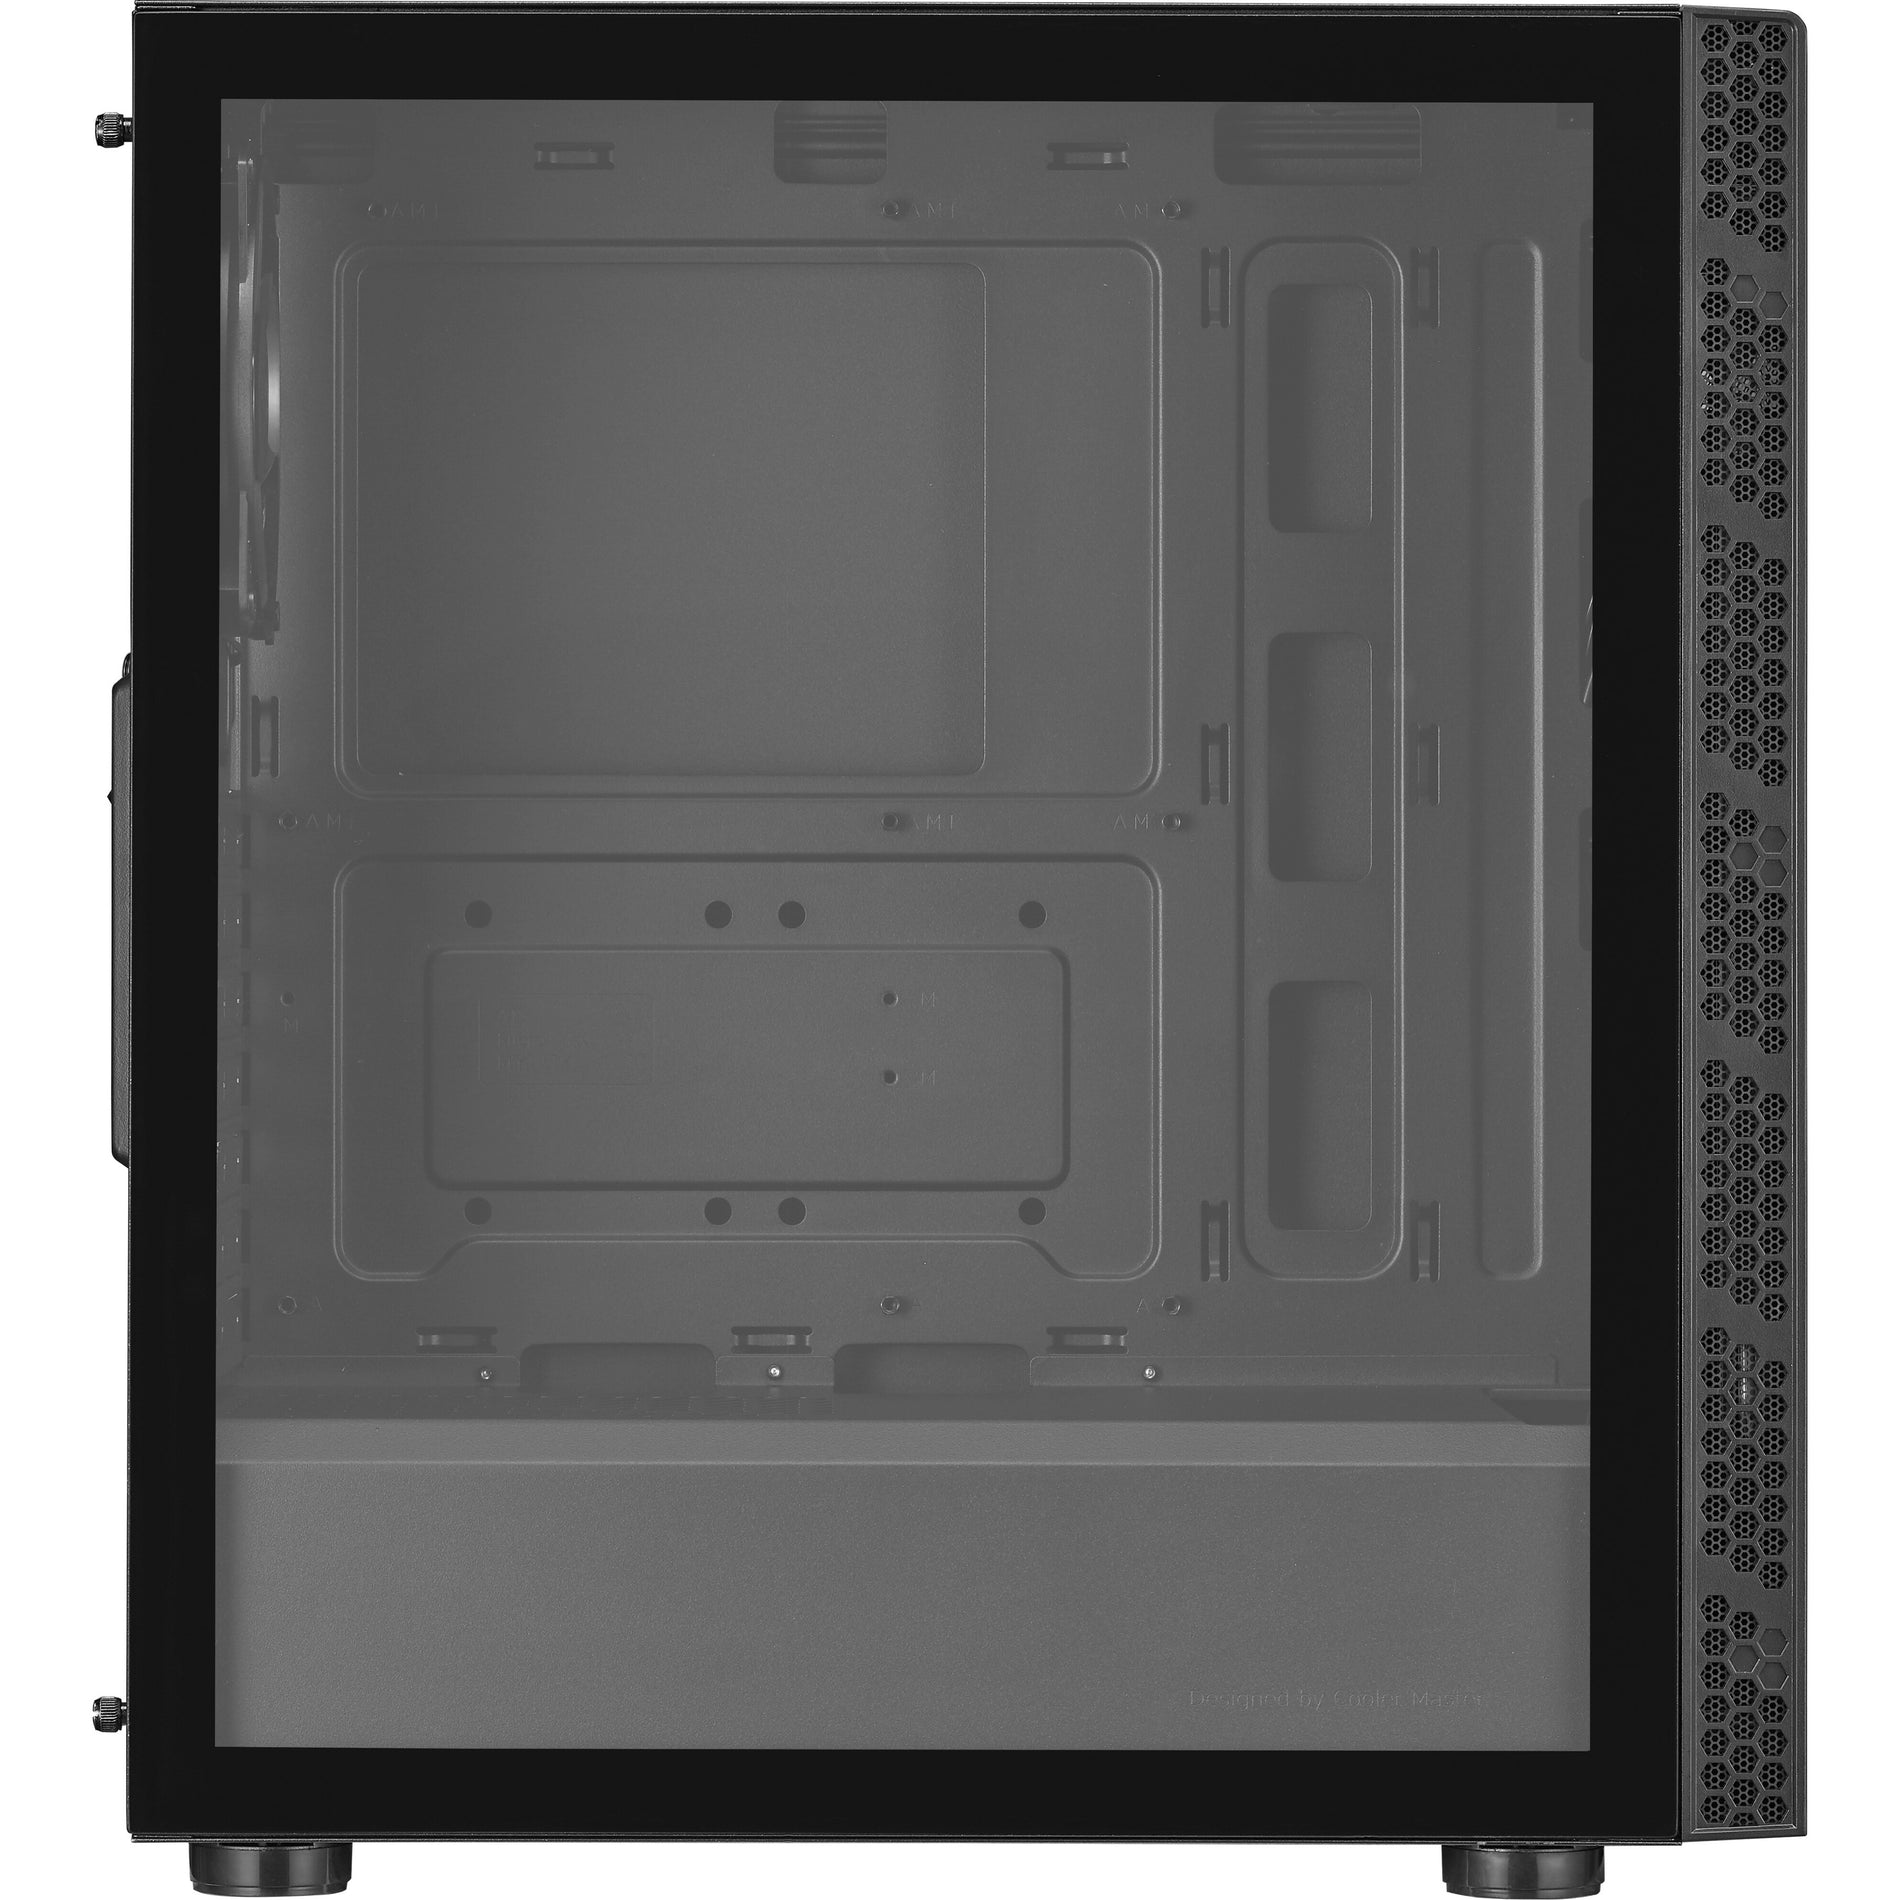 Cooler Master MB600L2-KG5N-S00 MasterBox Gaming Computer Case, Mid-tower, Tempered Glass, Black